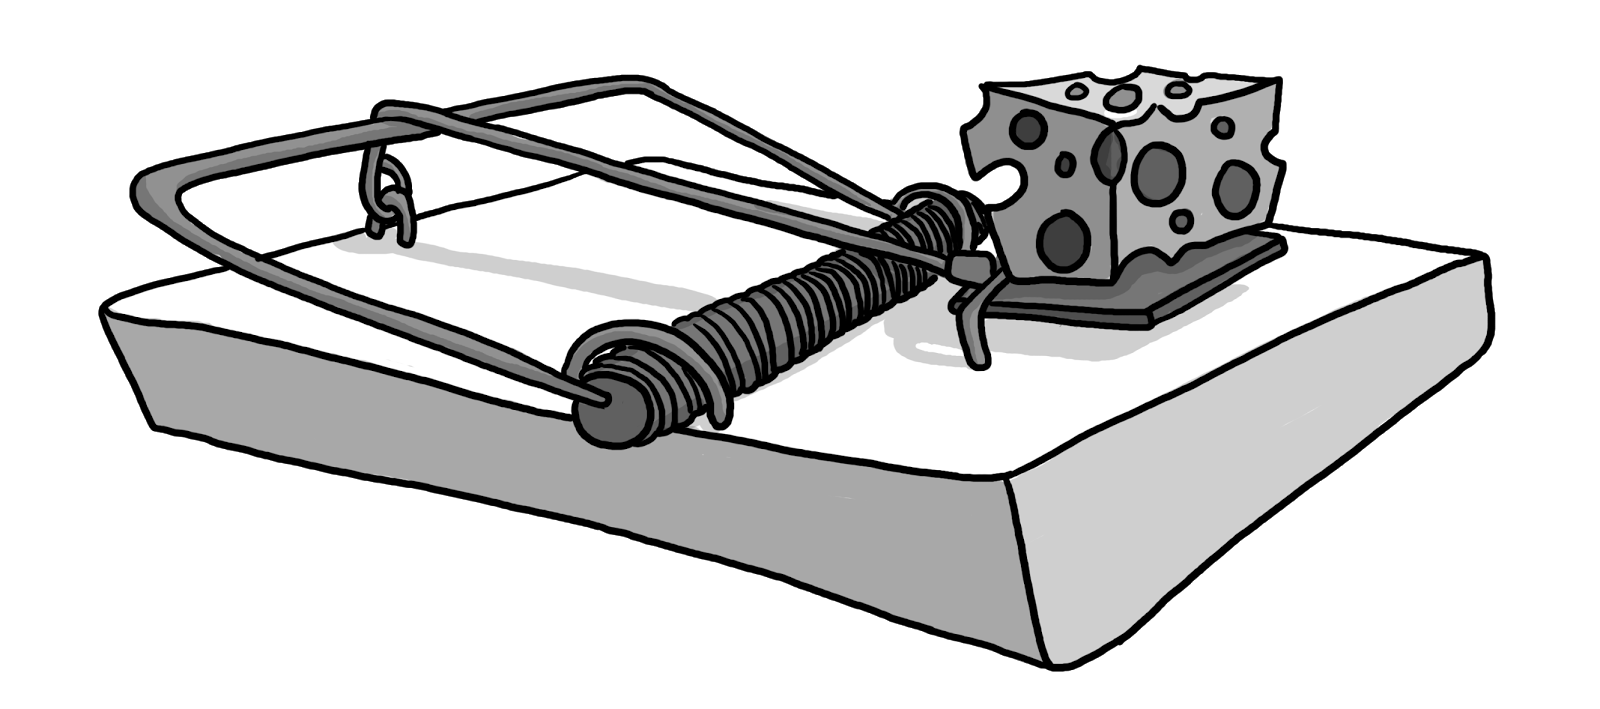 free clipart mouse trap - photo #4